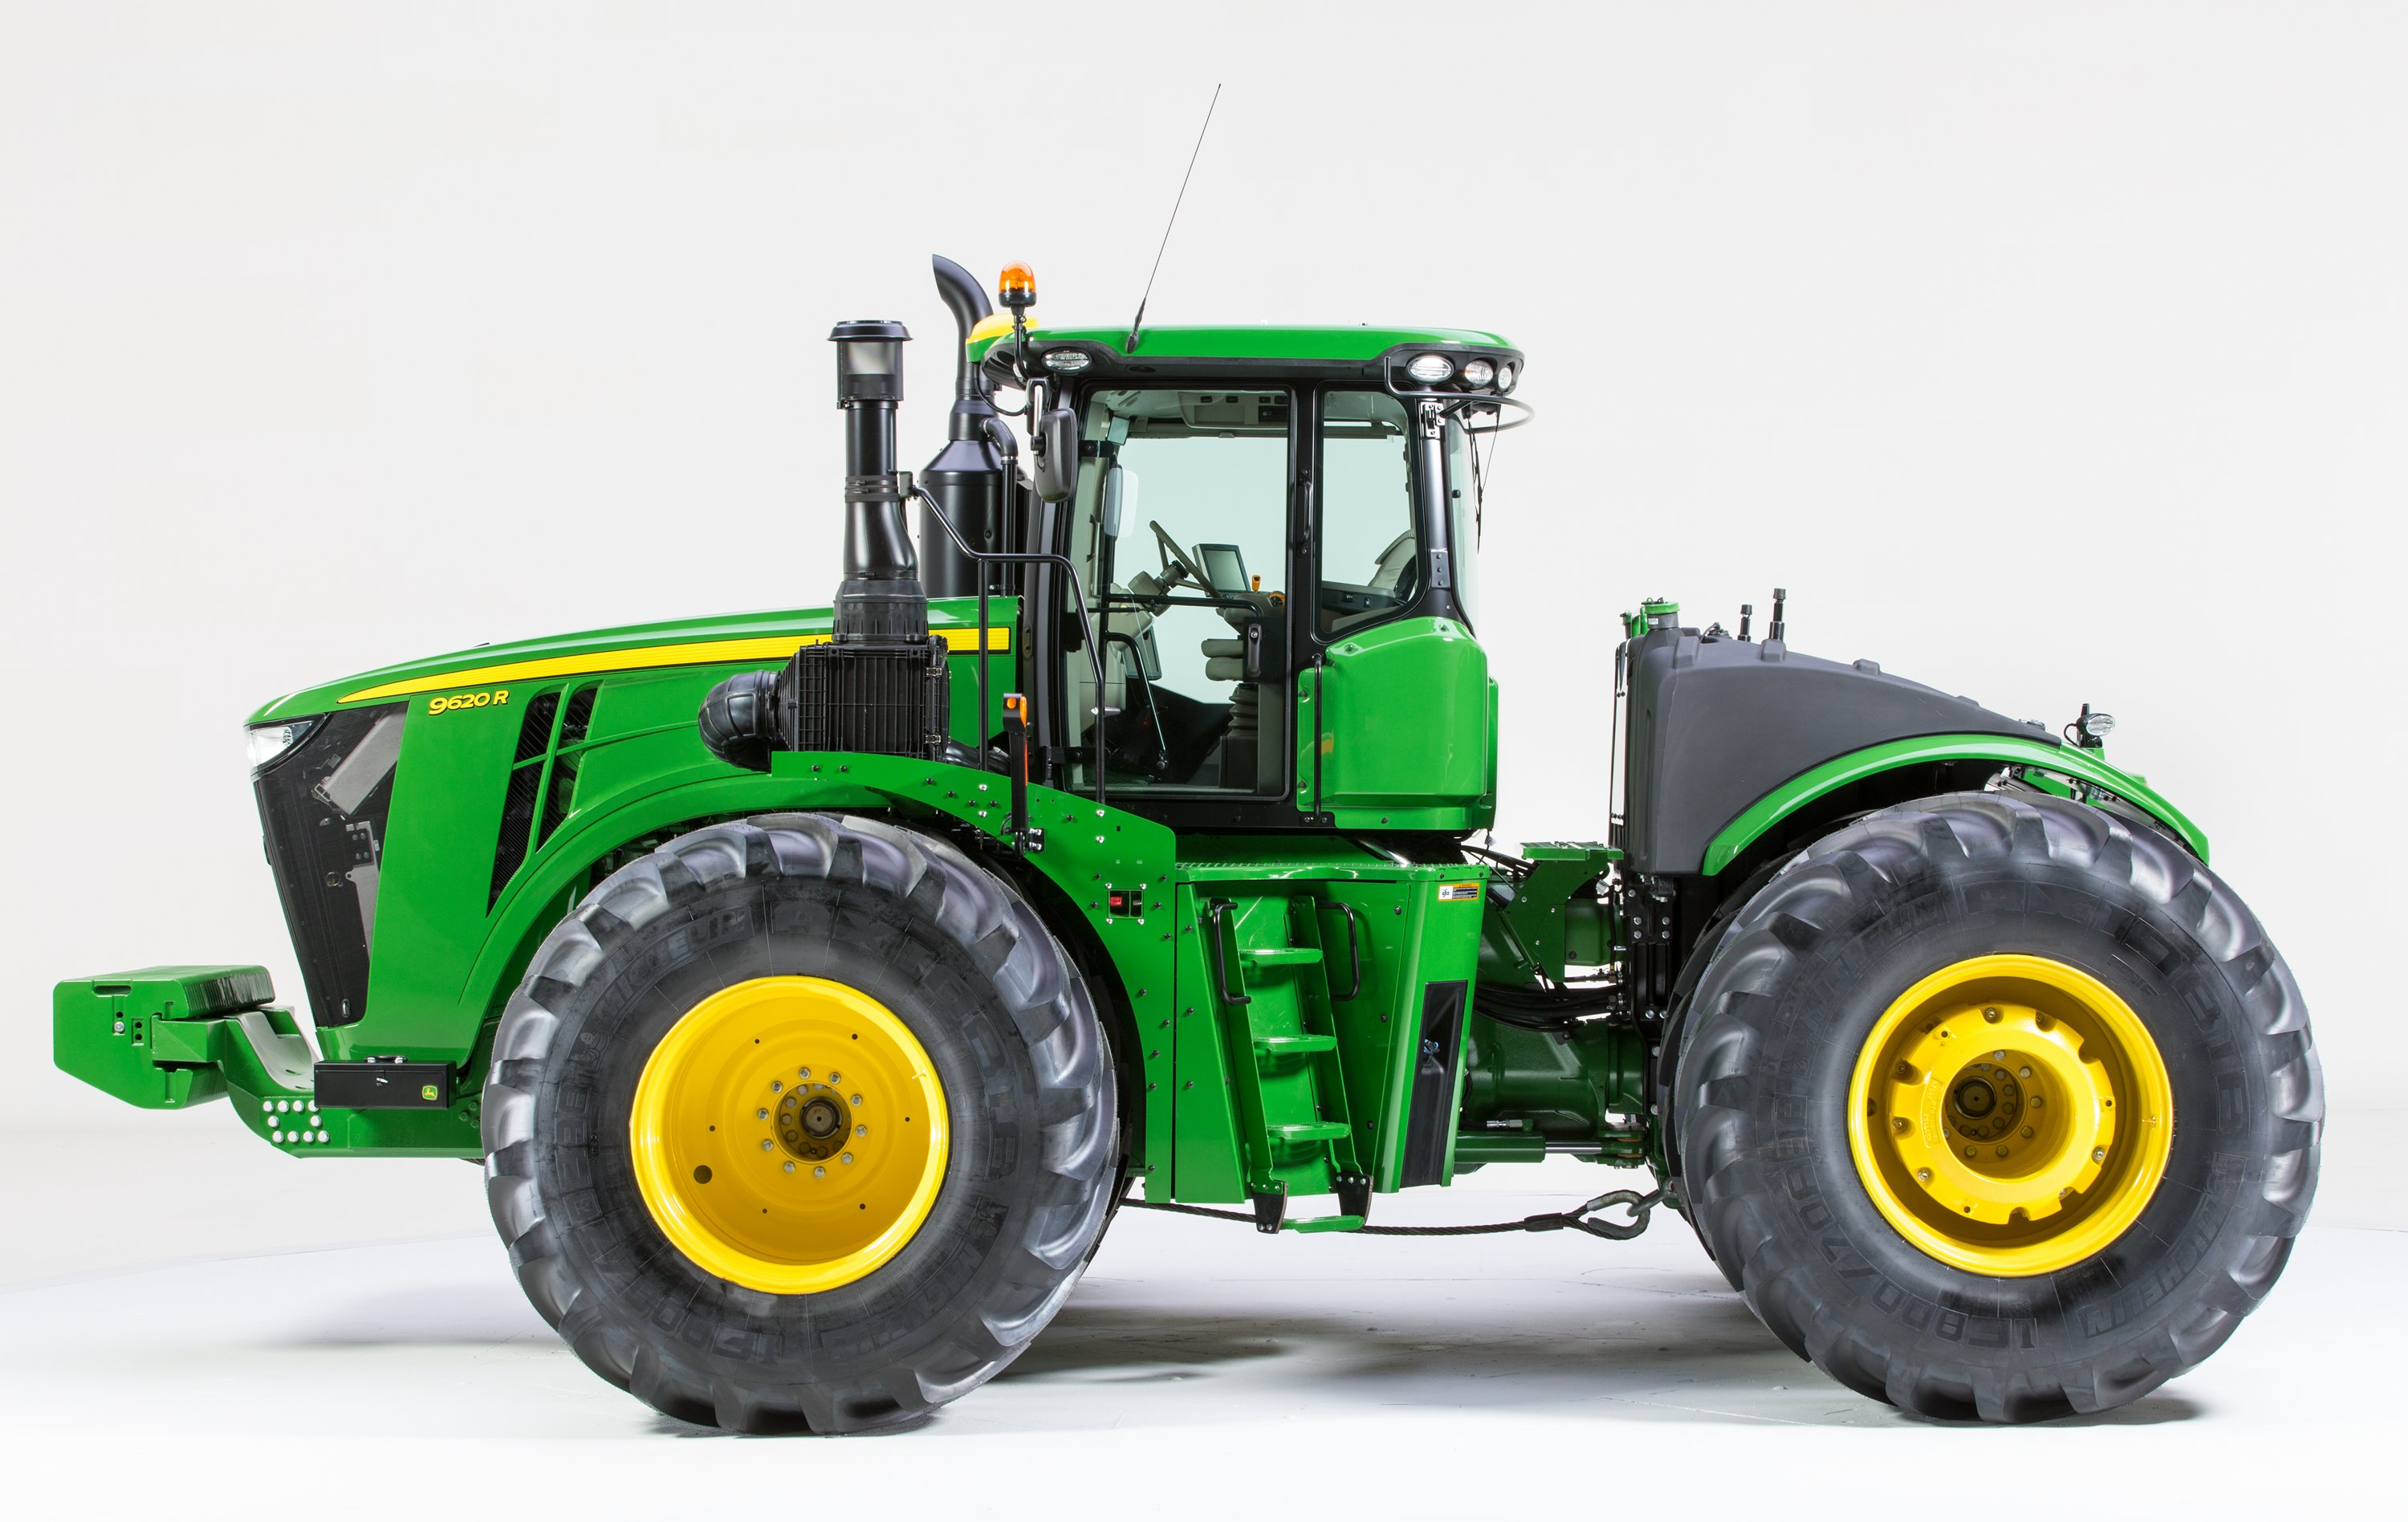 ... the side view of a John Deere 9620R tractor with composite fuel tank